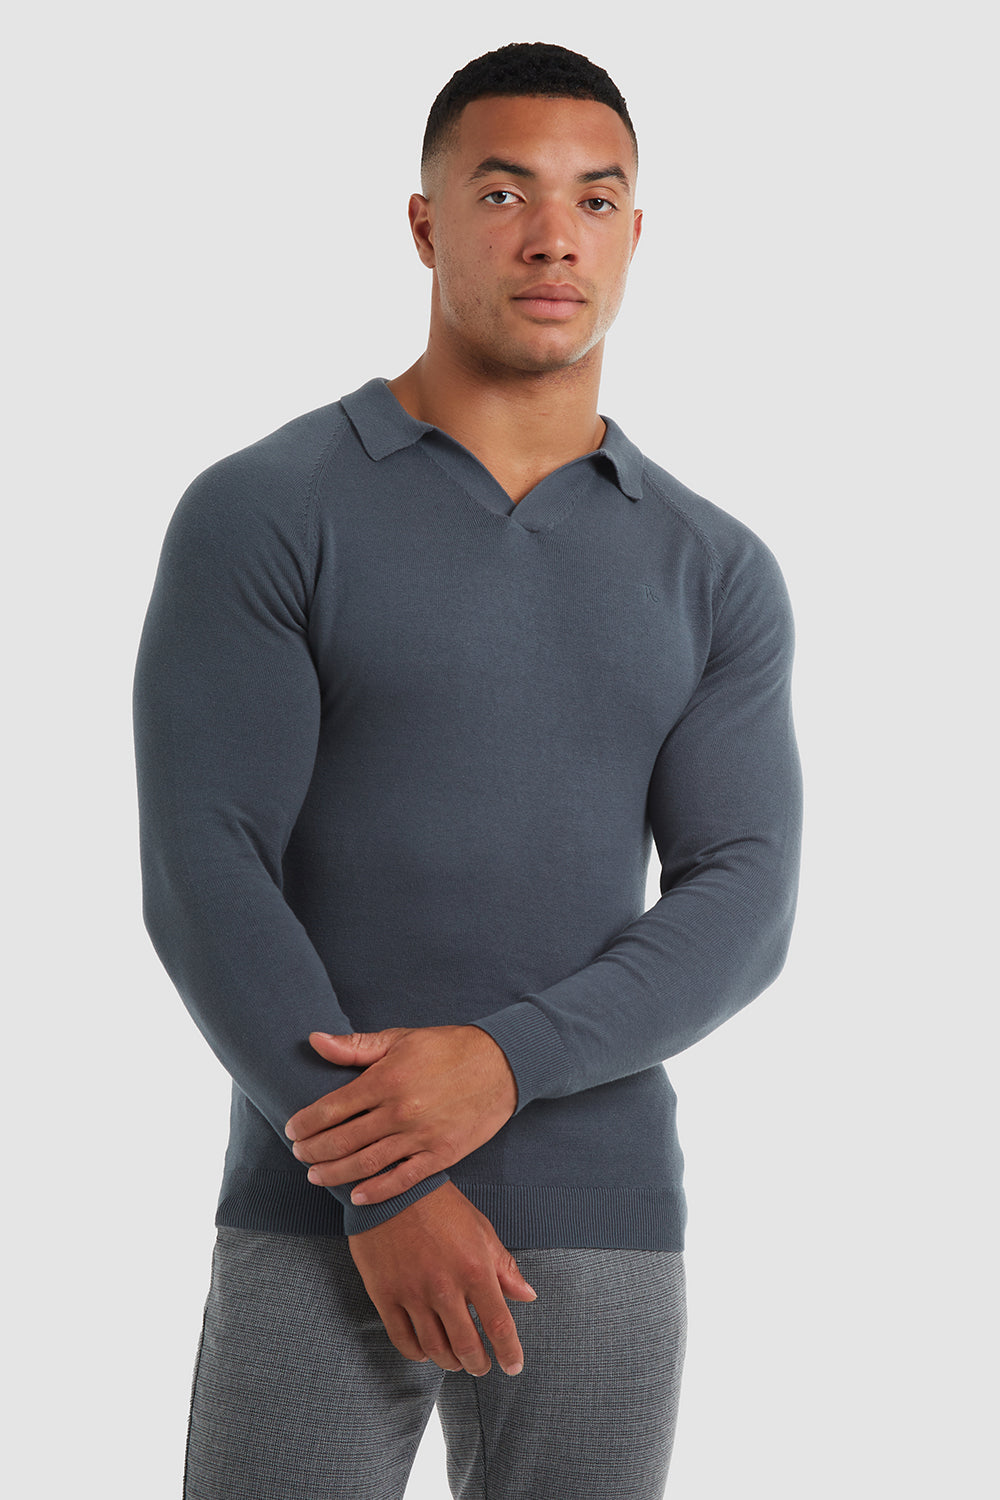 Buttonless Open Collar Polo in Petrol - TAILORED ATHLETE - ROW